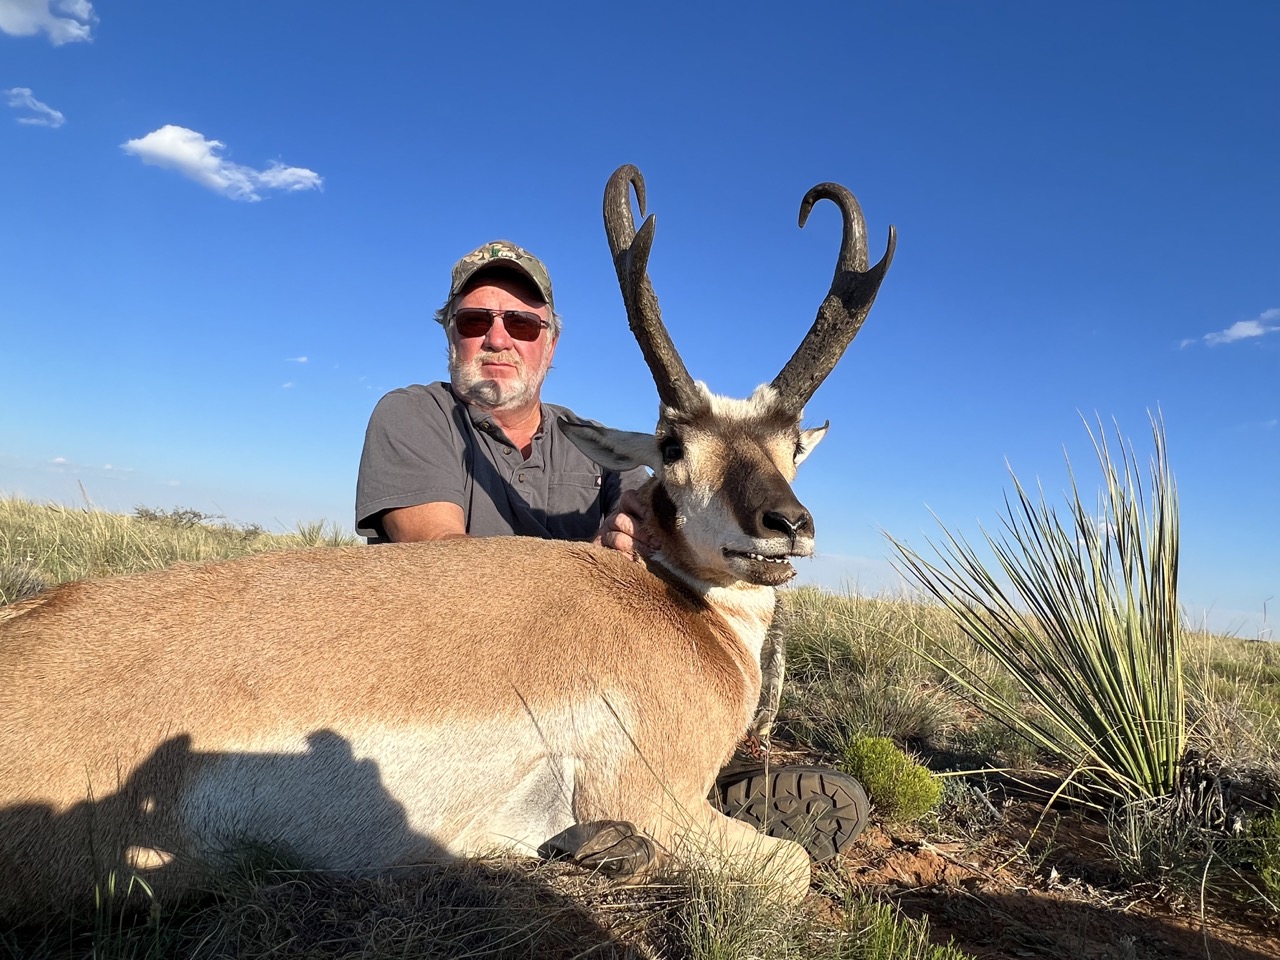 3 DAY ANTELOPE HUNT IN FORT SUMMER, NEW MEXICO (AUGUST 12-14)